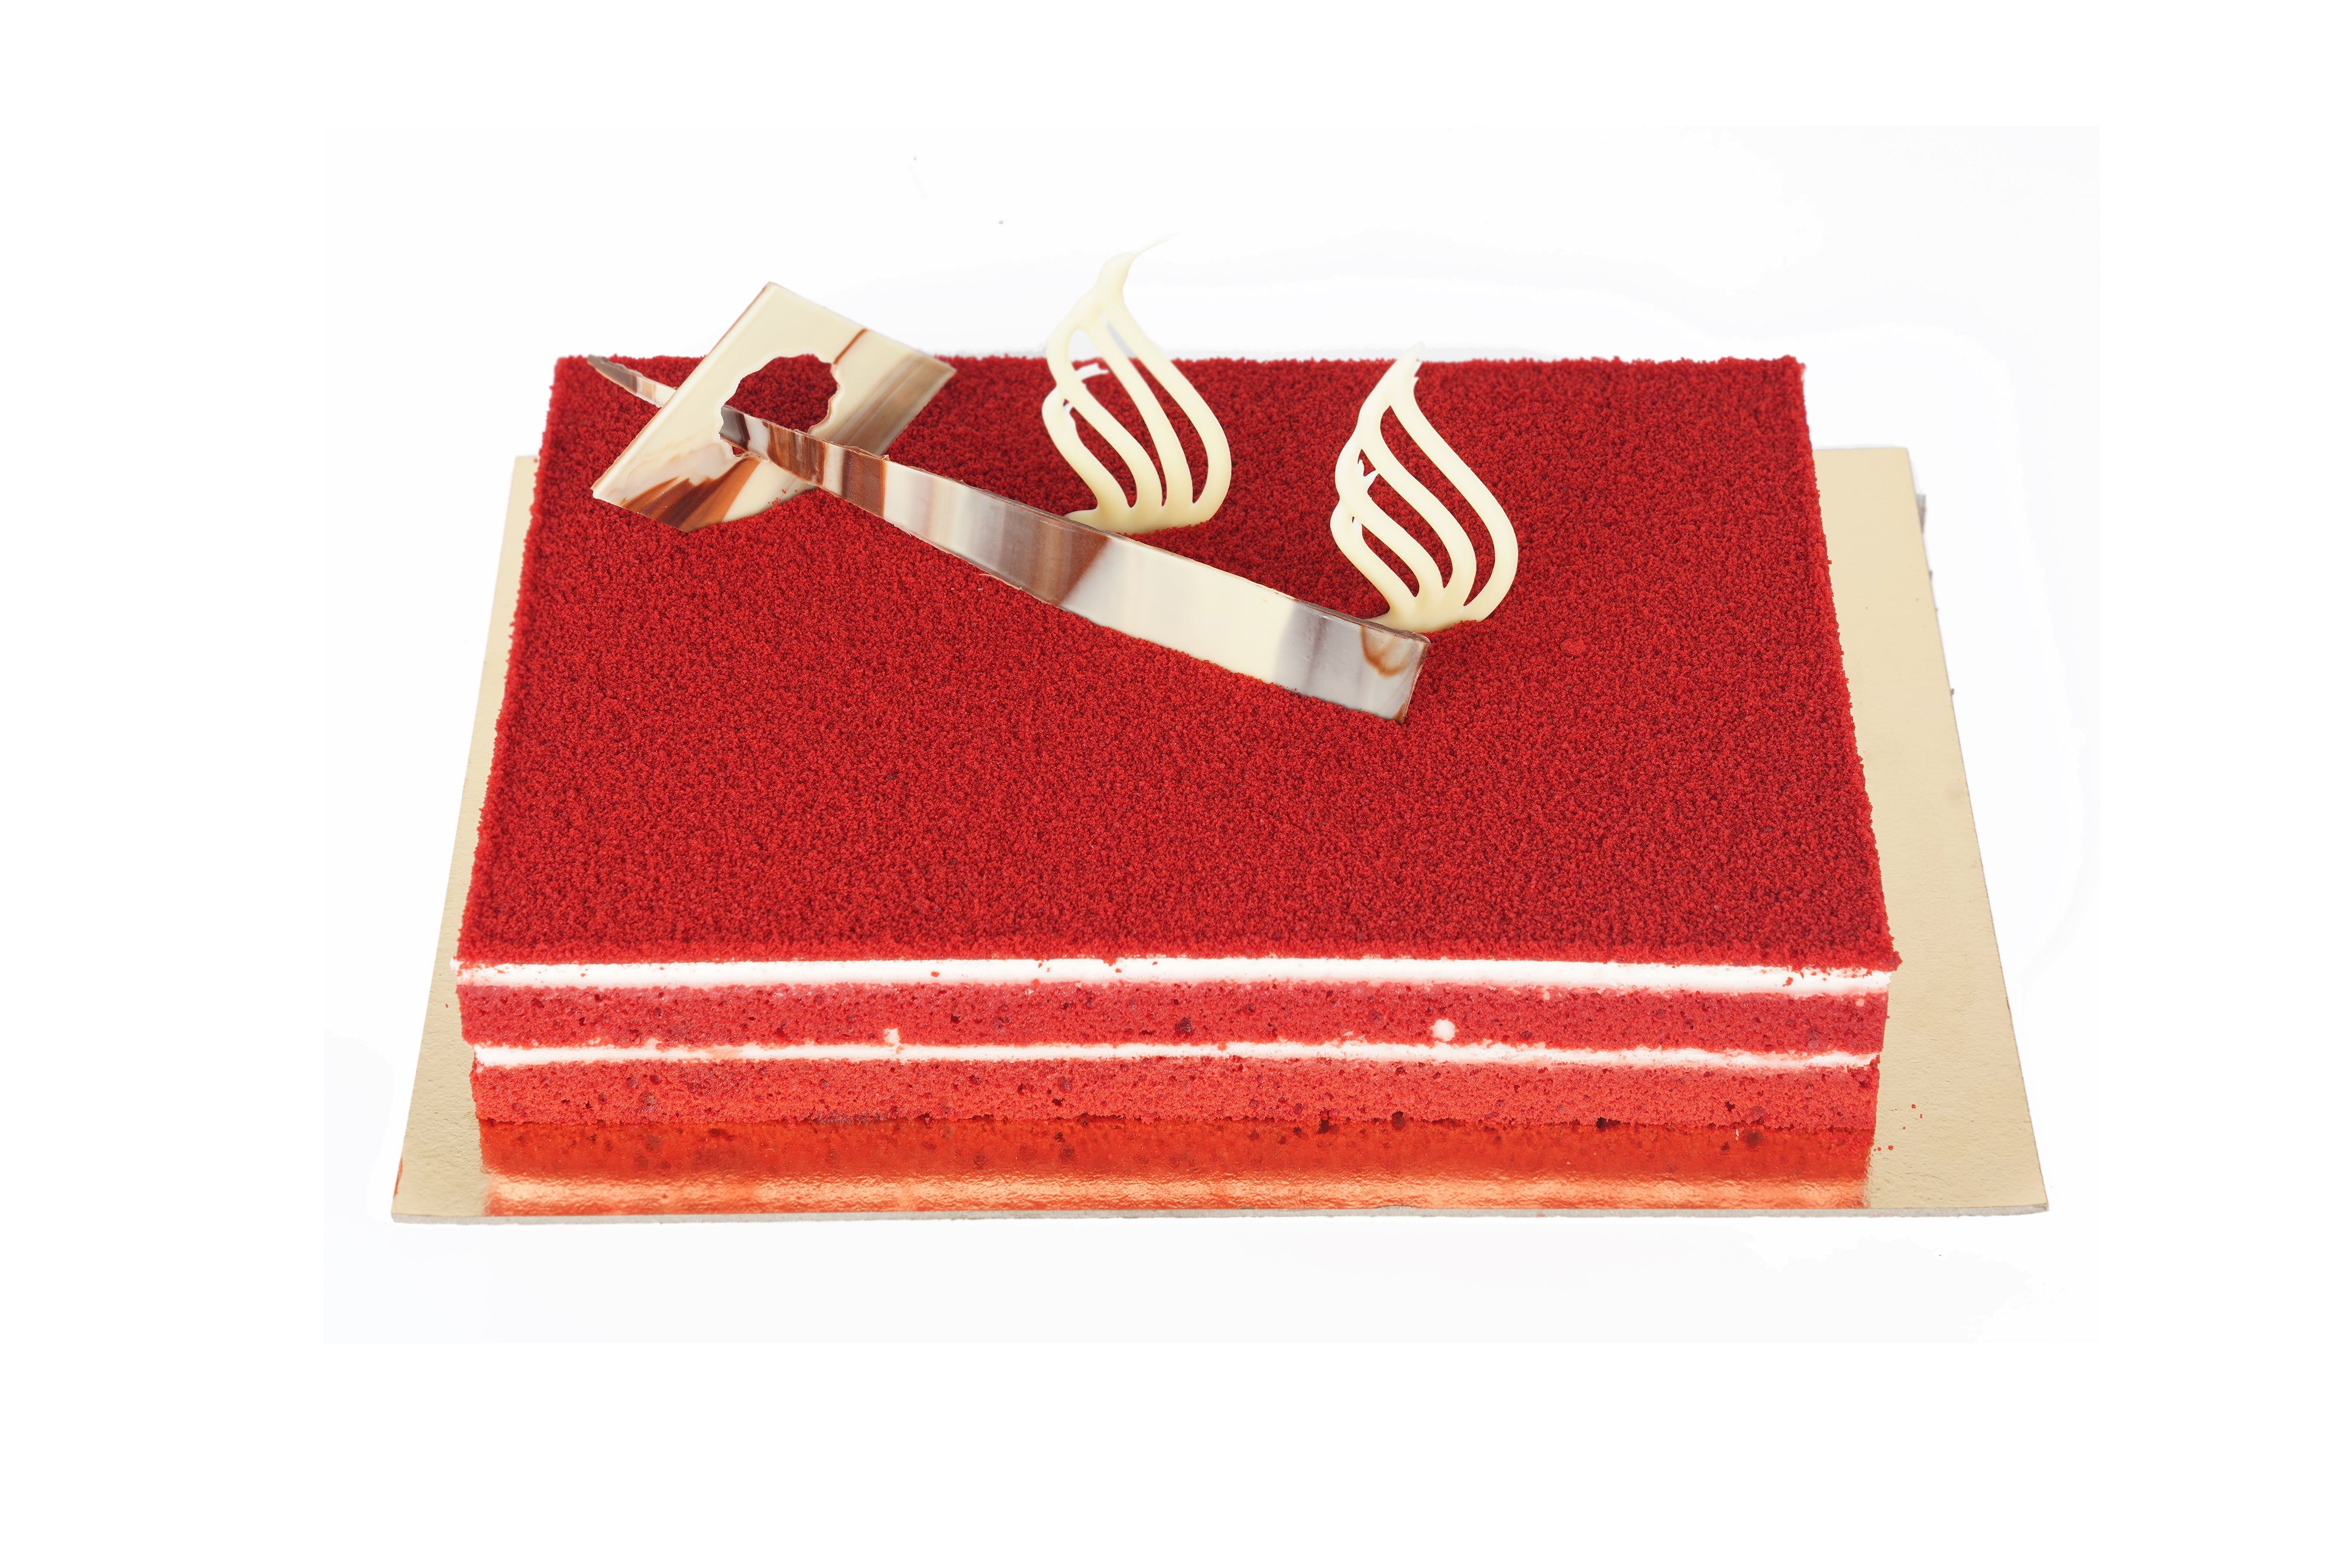 Le Chocola Chocolate Gift Online Order Free delivery Gifts UAE Online Le Chocola Send Gifts Sweets Gifts Birthday Gifts Mix Chocolates Chocolates Online Wedding Chocolates Dubai Gifts Online Gifts Le Chocola Online Store Mobile App Chocolate Delivery